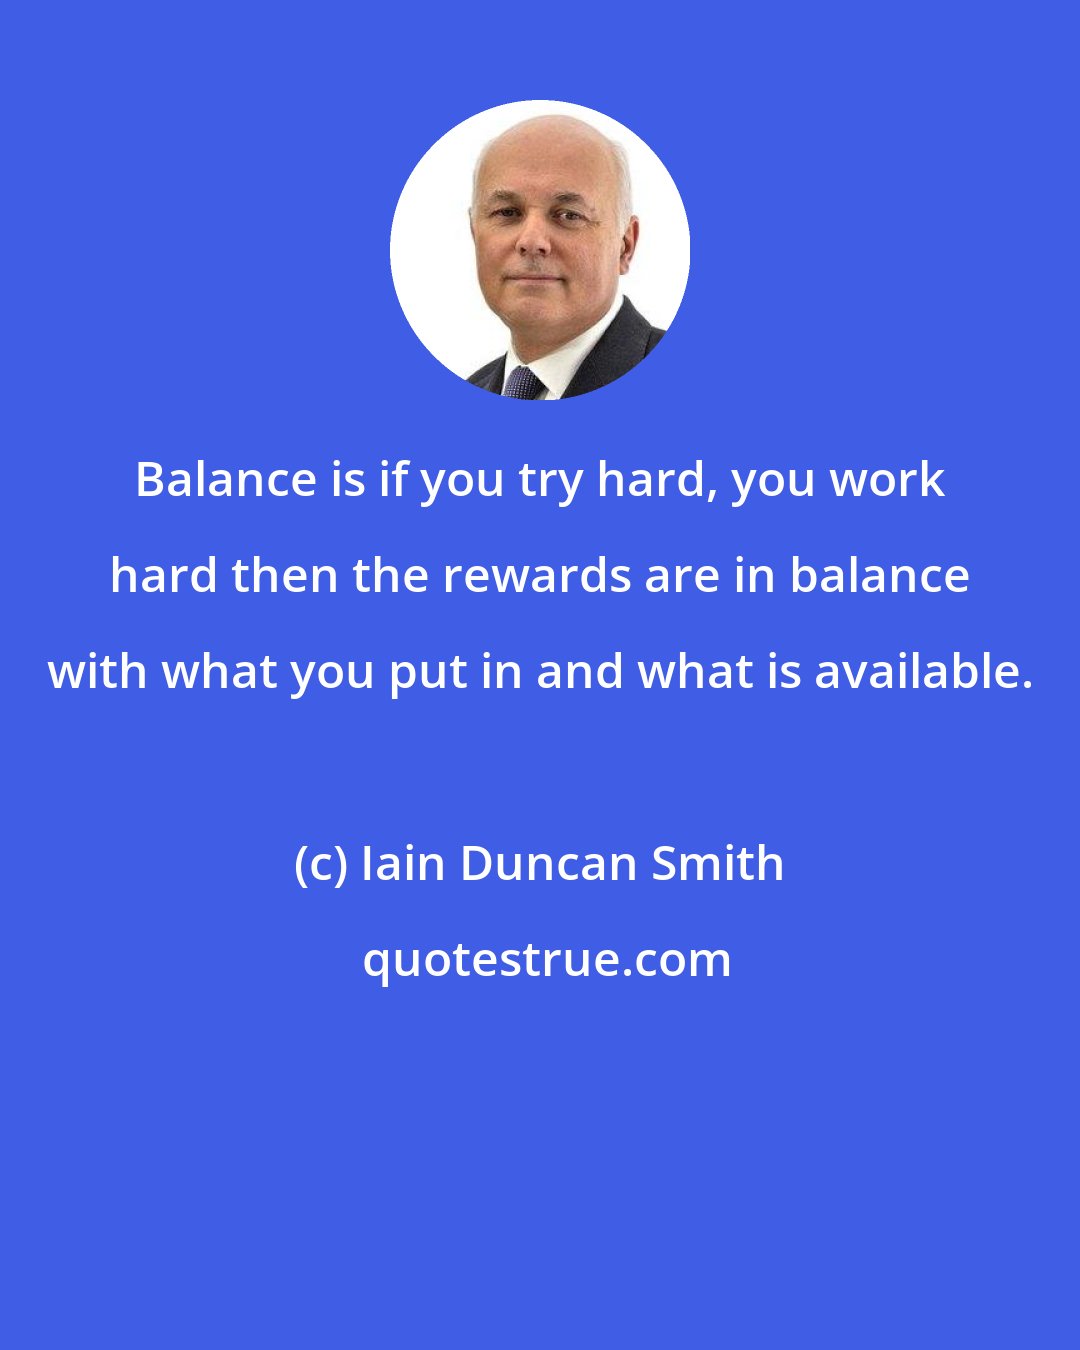 Iain Duncan Smith: Balance is if you try hard, you work hard then the rewards are in balance with what you put in and what is available.